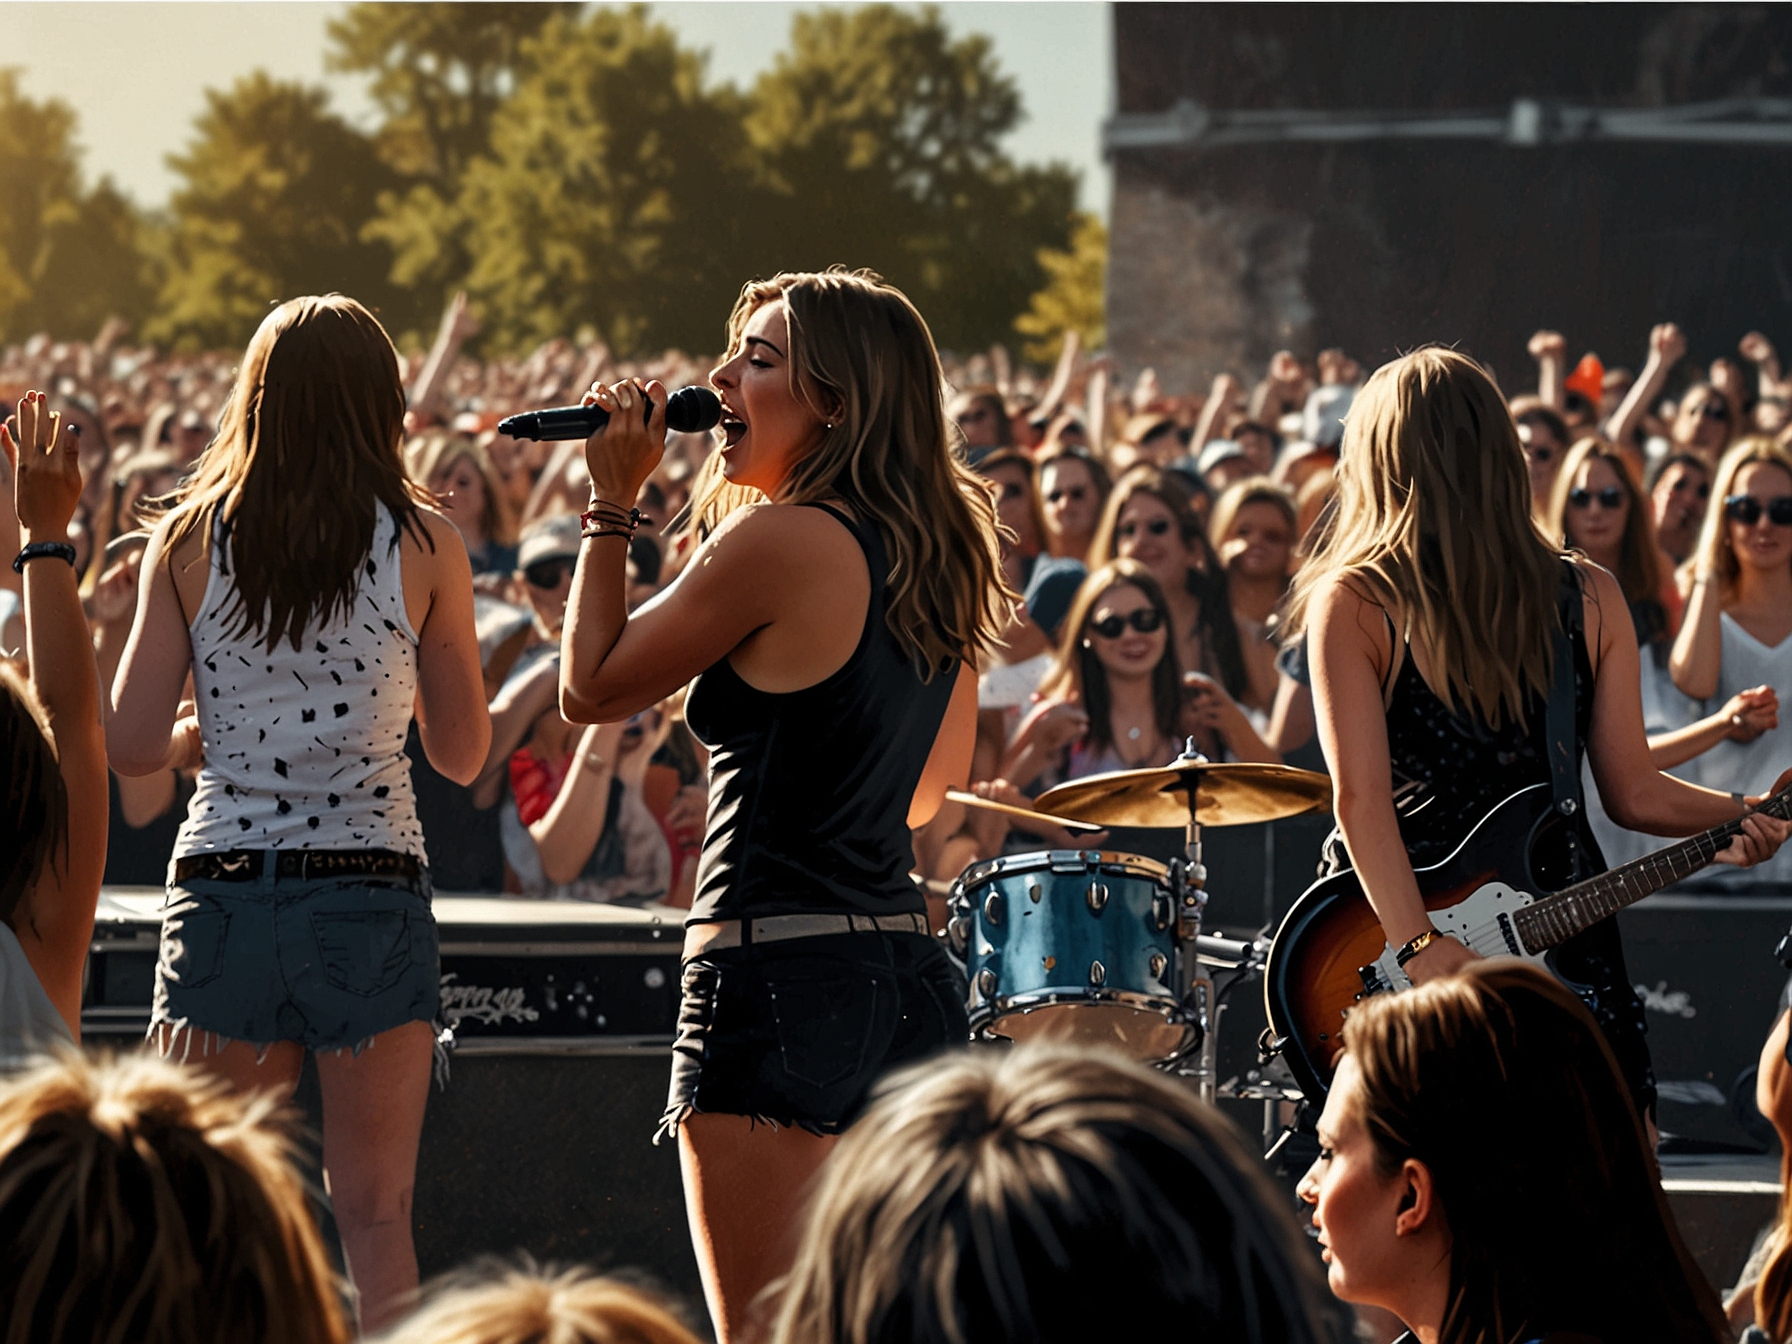 The Beaches, the all-girl rock band, performing live on stage at the Rogers Festival in Edmonton. Fans cheering and enjoying the gritty, vibrant rock vibes.